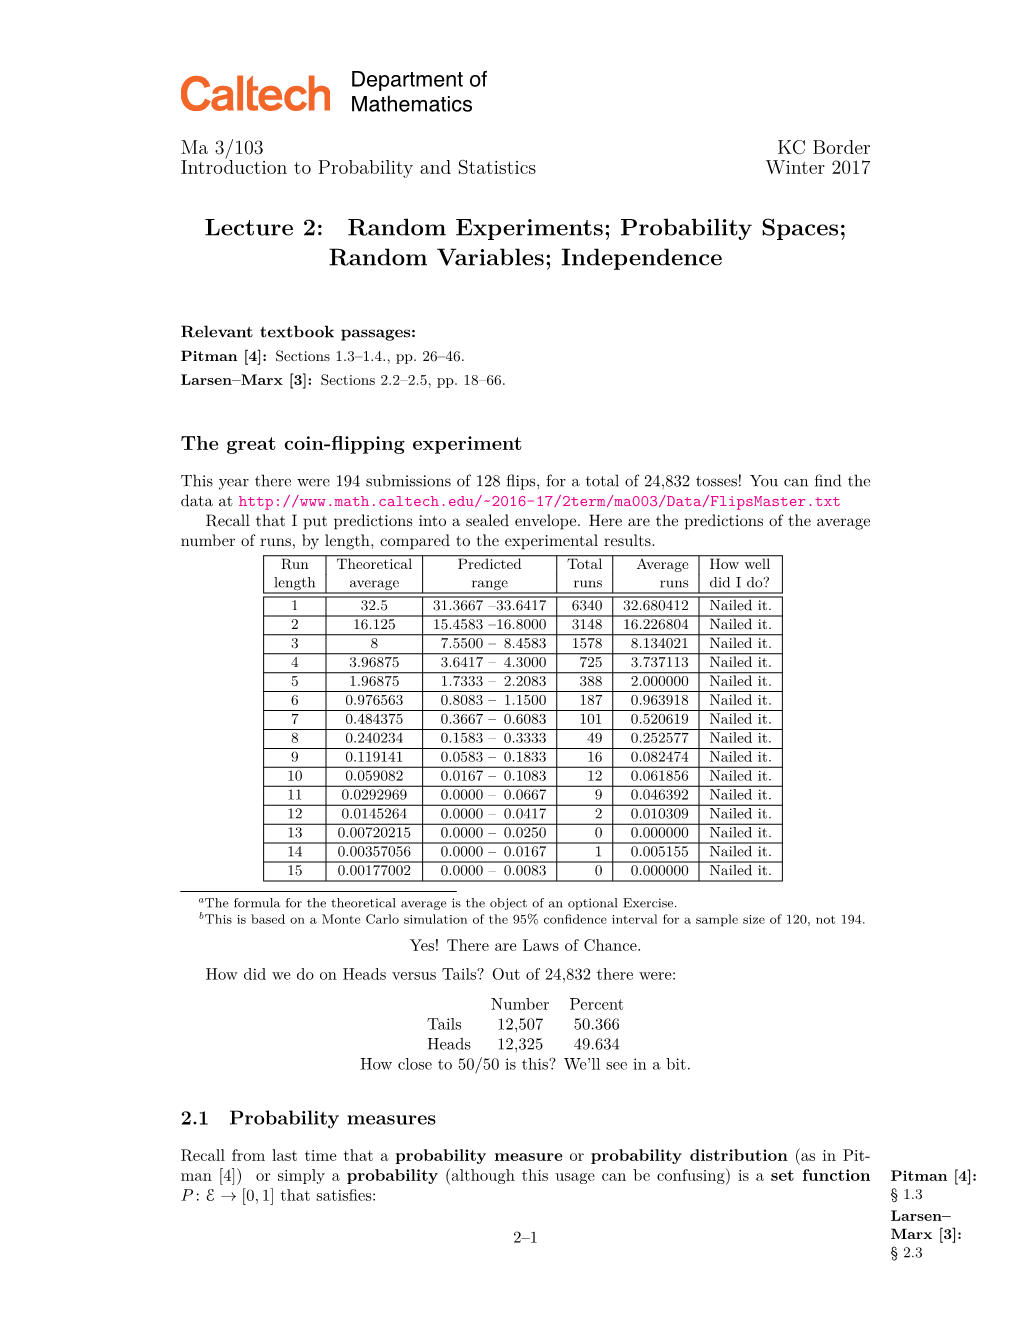 Lecture 2: Random Experiments; Probability Spaces; Random Variables; Independence